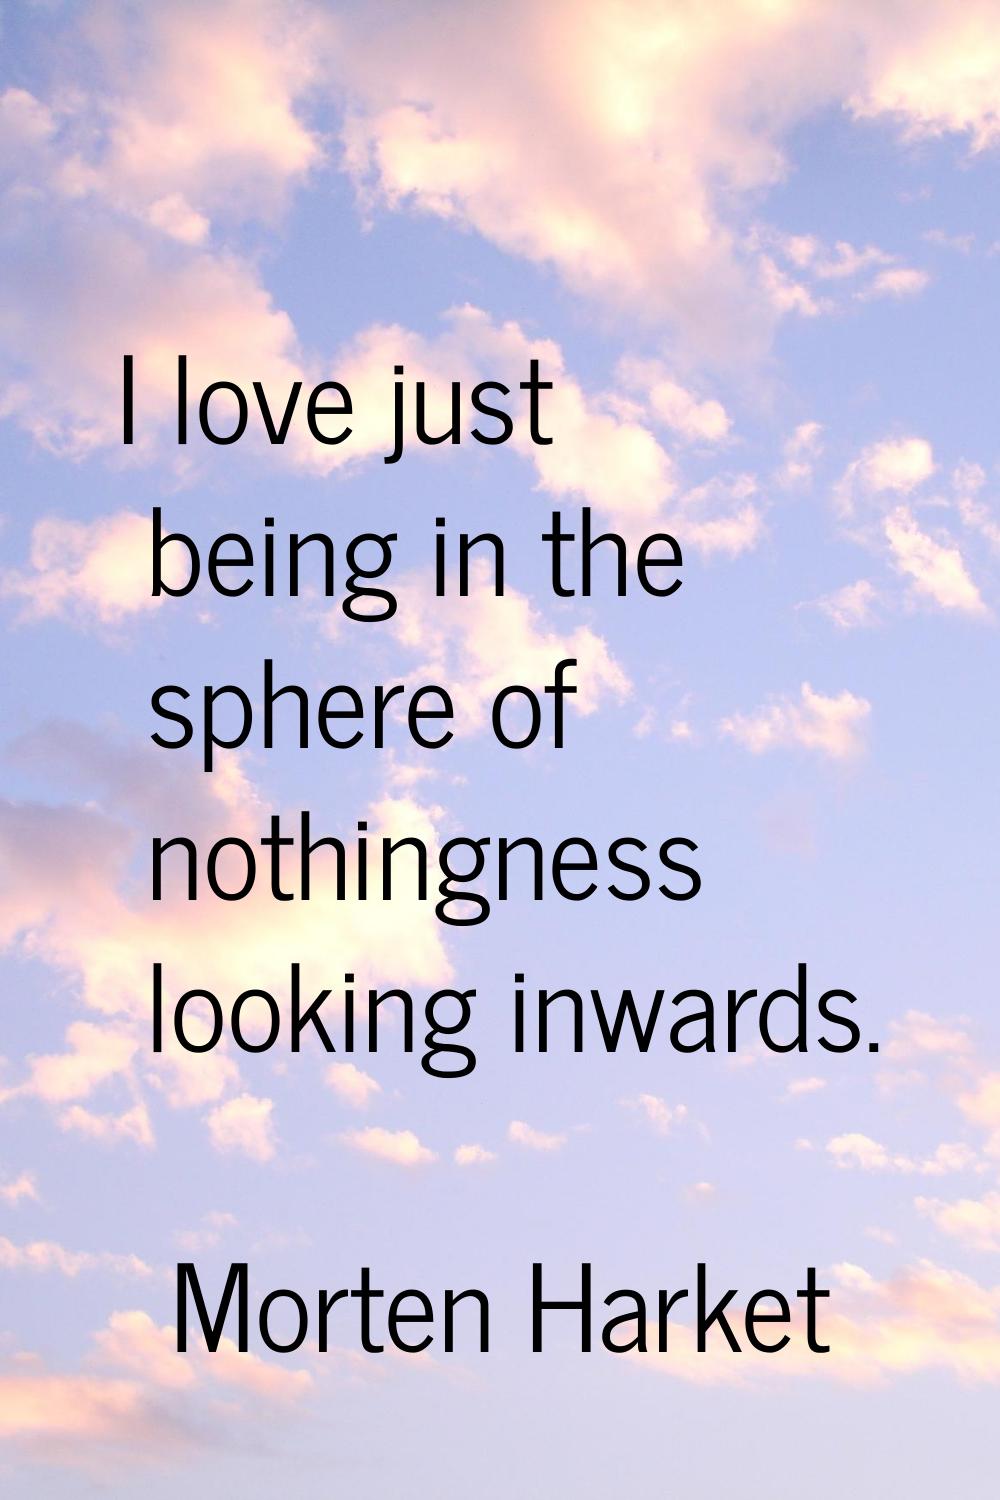 I love just being in the sphere of nothingness looking inwards.